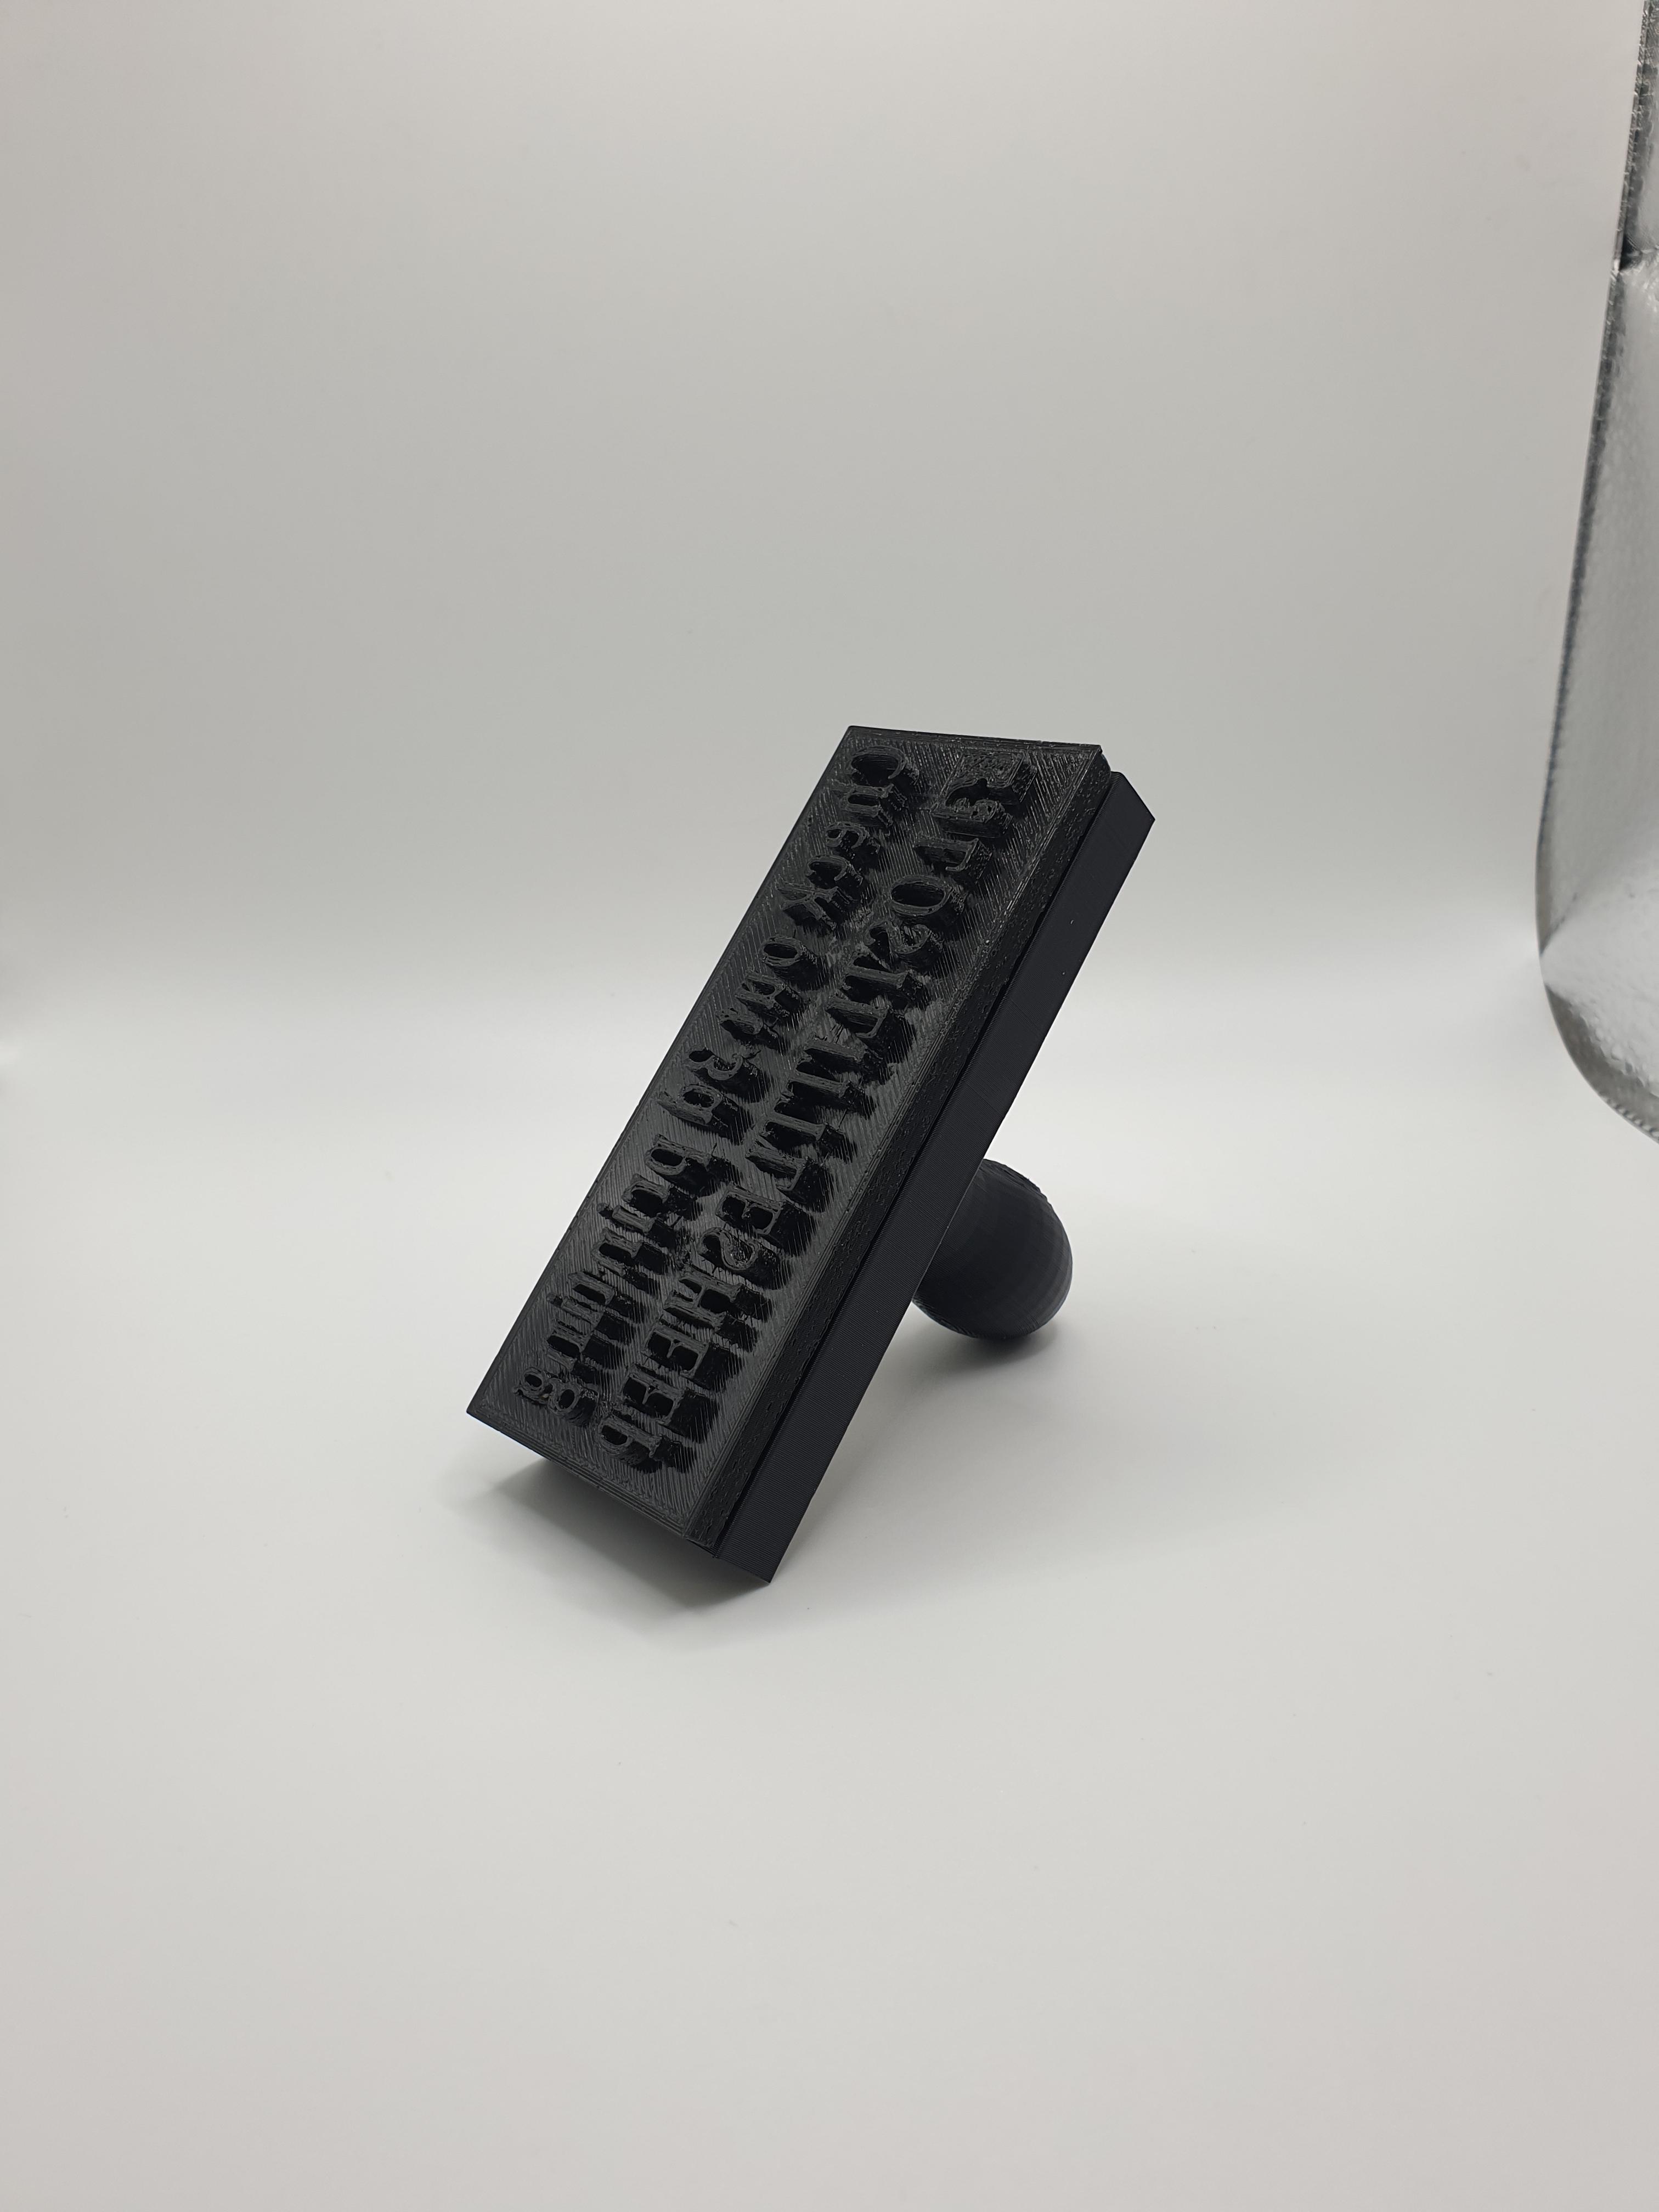 STAMP AND BLANK BLOCK 3d model